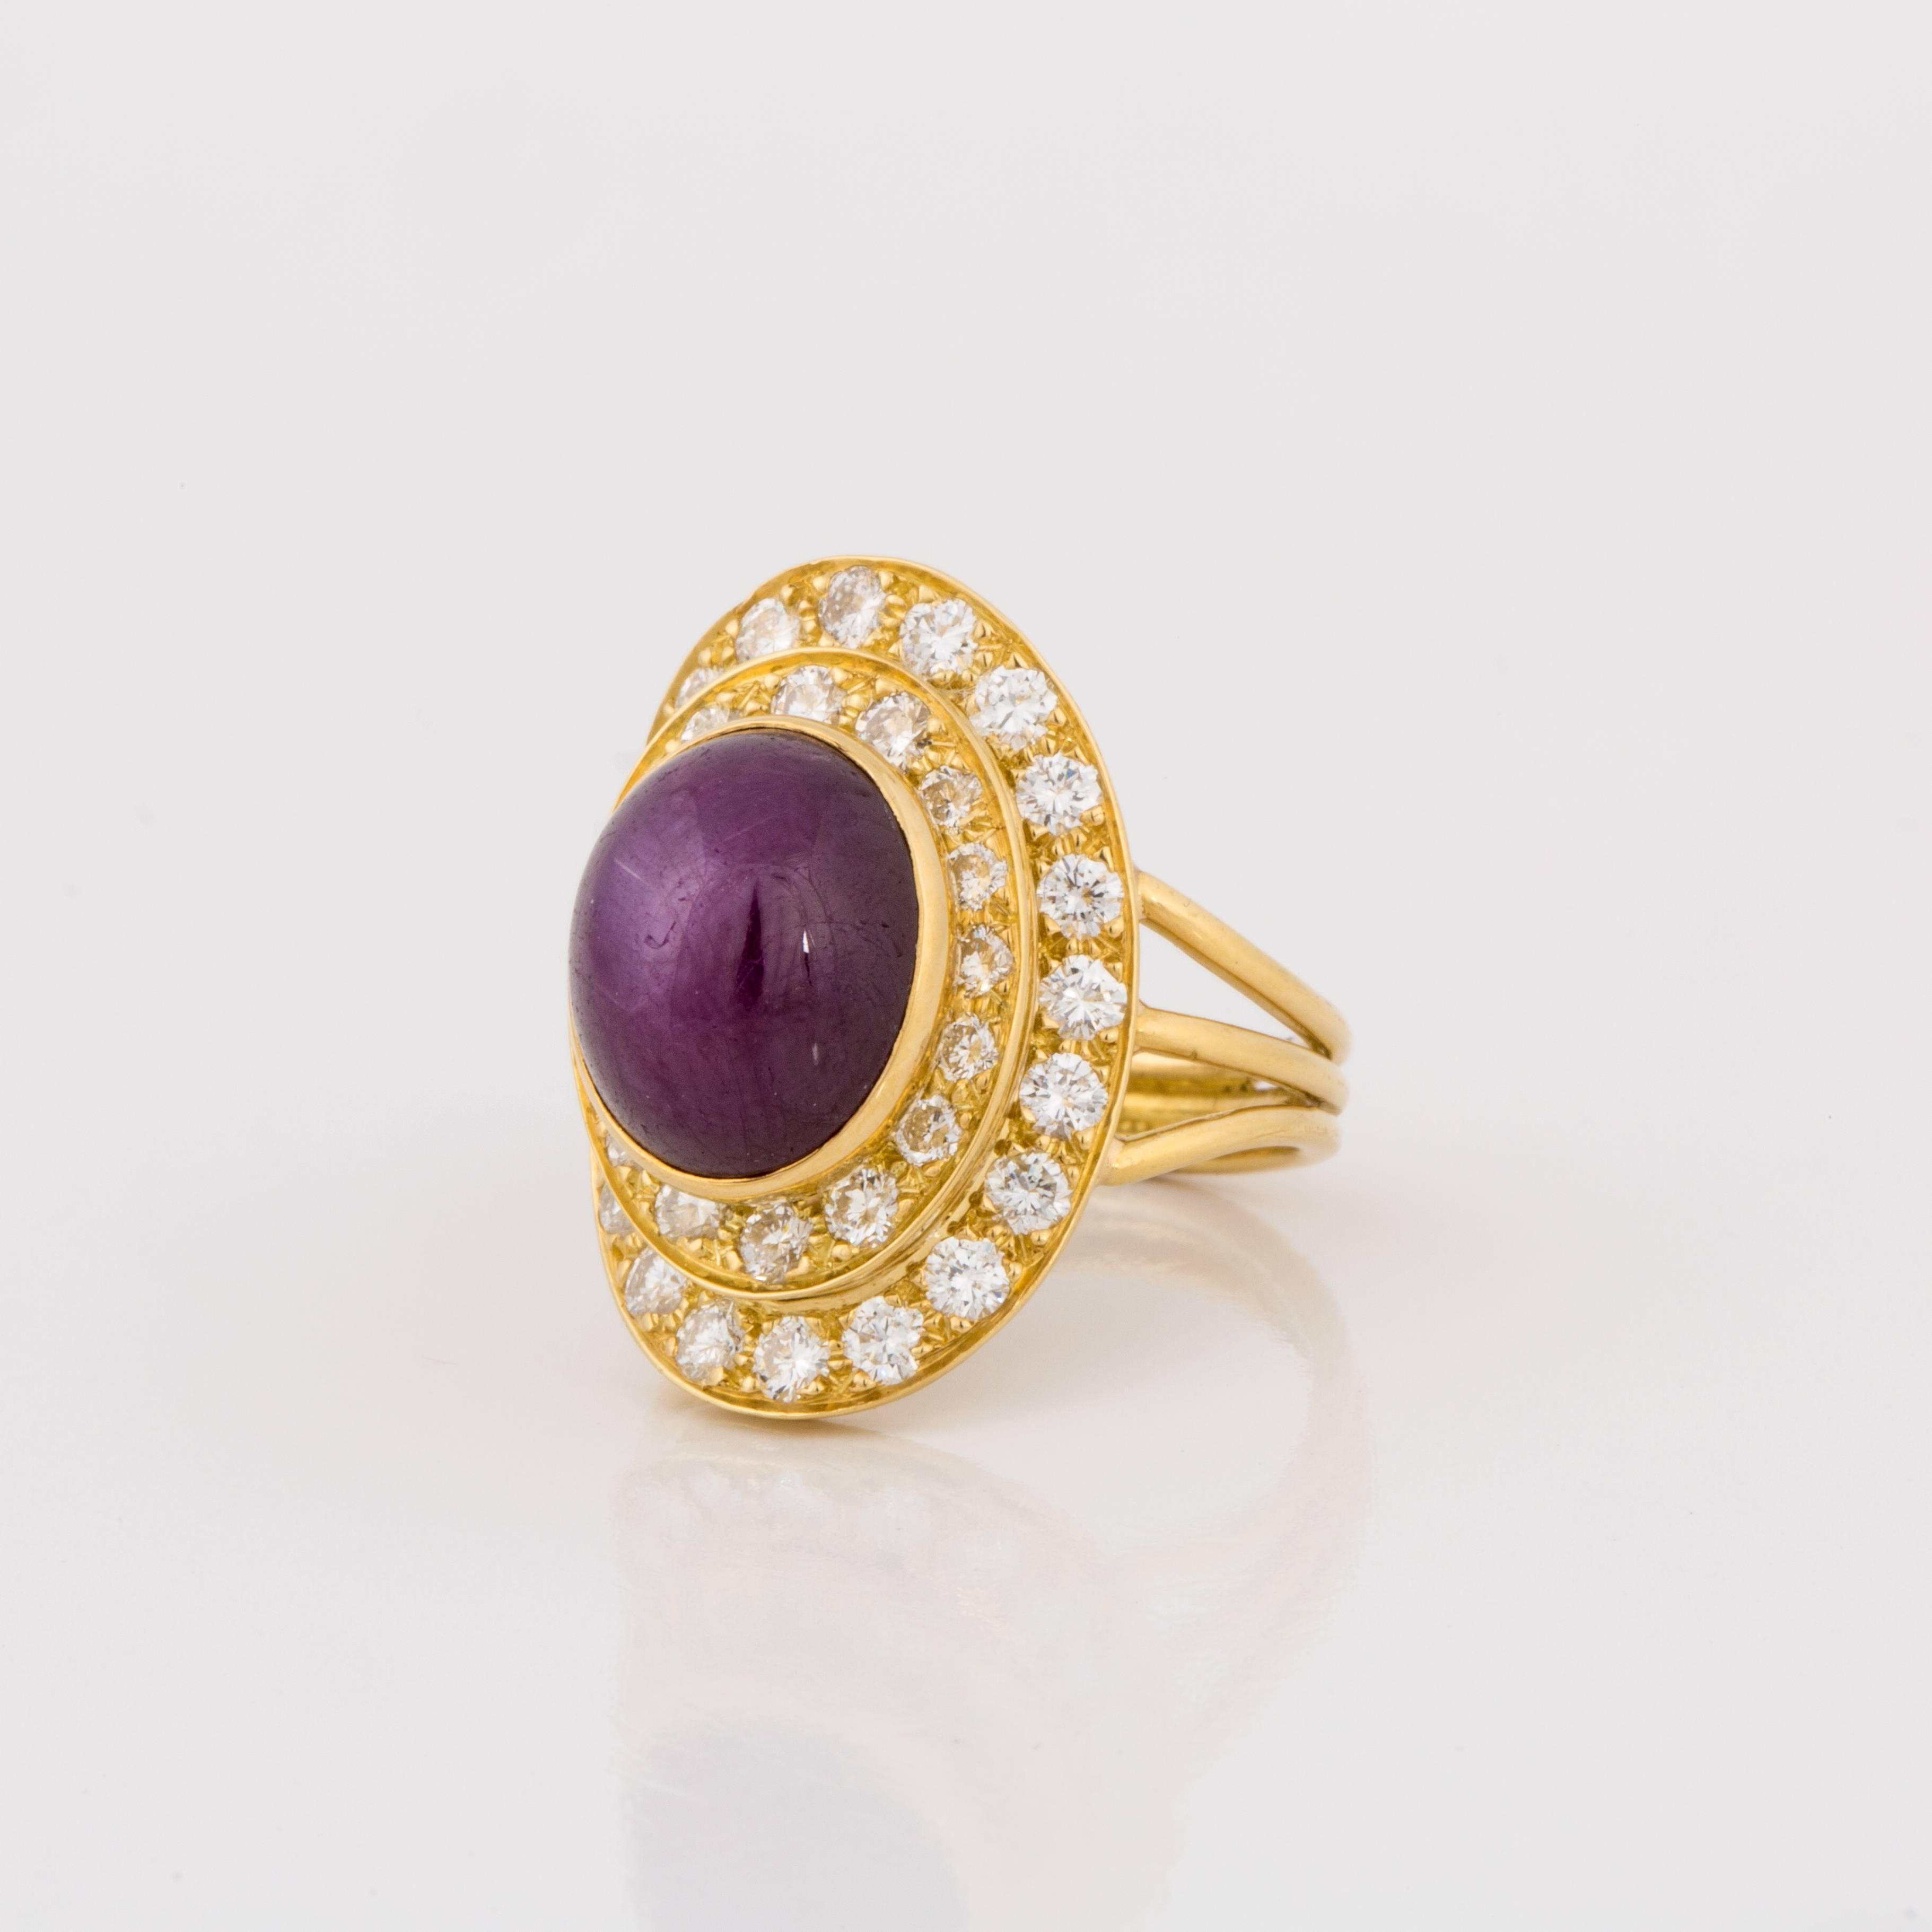 This ring is crafted in 18K yellow gold and features a star ruby which weighs 12 carats.  It is framed by 36 round diamonds that total 2 carats, G-H color and VS1-SI1 clarity.  The ring is currently a size 7 1/2.  Presentation area measures 15/16